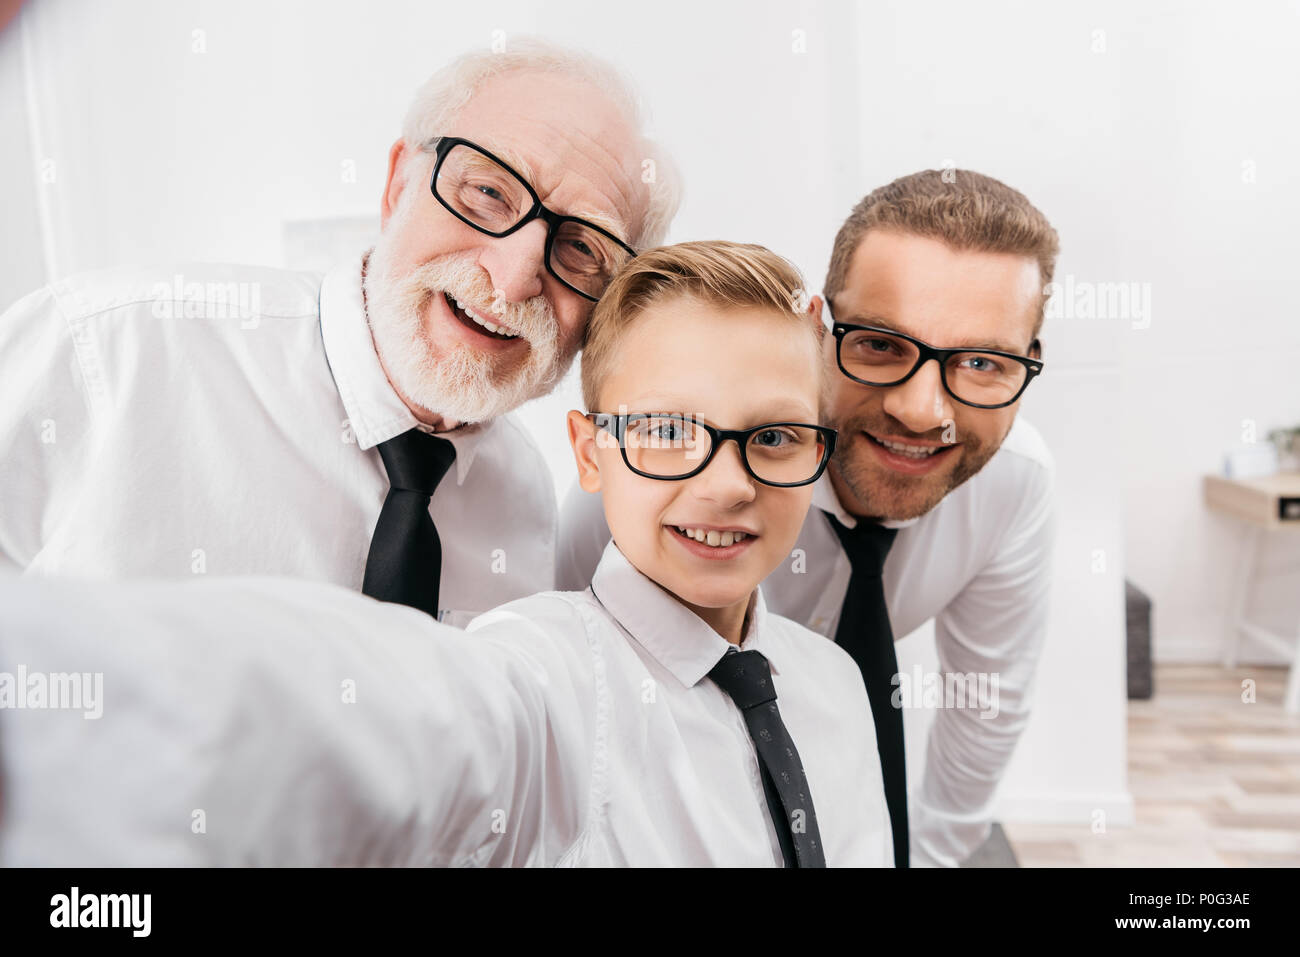 Father, son and grandfather wearing formal clothing and glasses taking a selfie Stock Photo